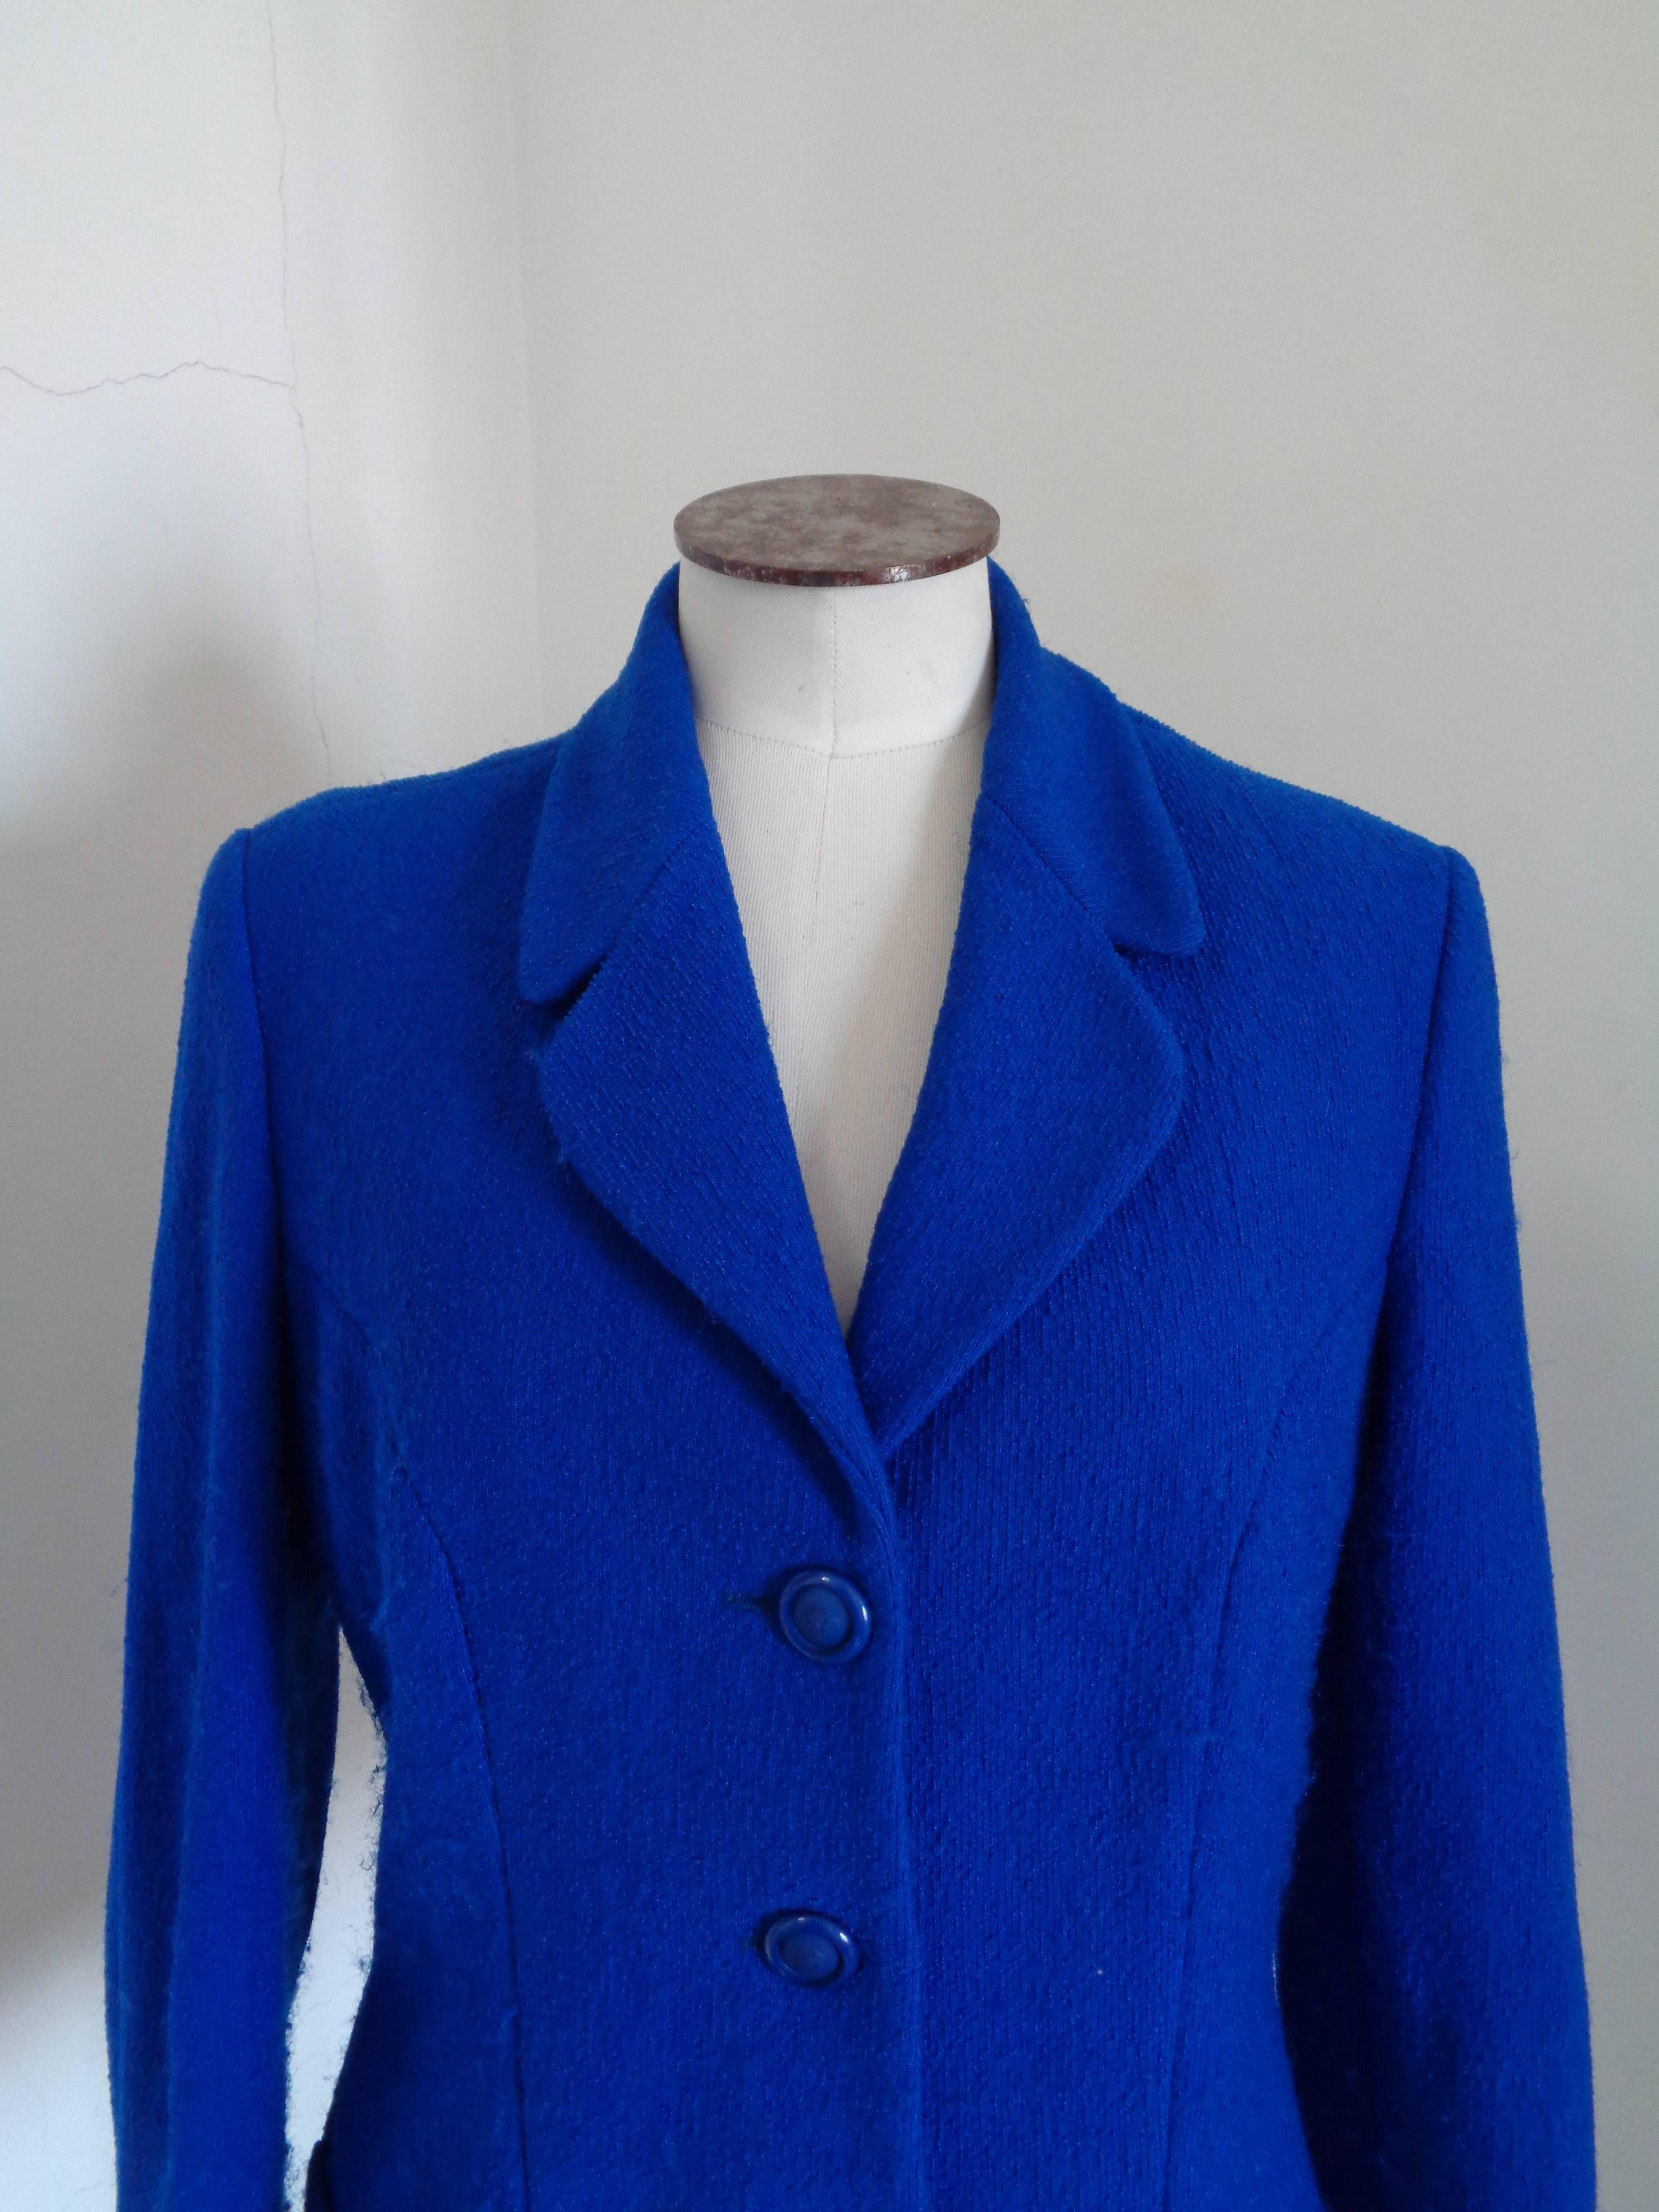 Versace Jeans Couture Blu Jacket

Totally made in italy in size 46

Composition: polyammide

Lining: Acetate